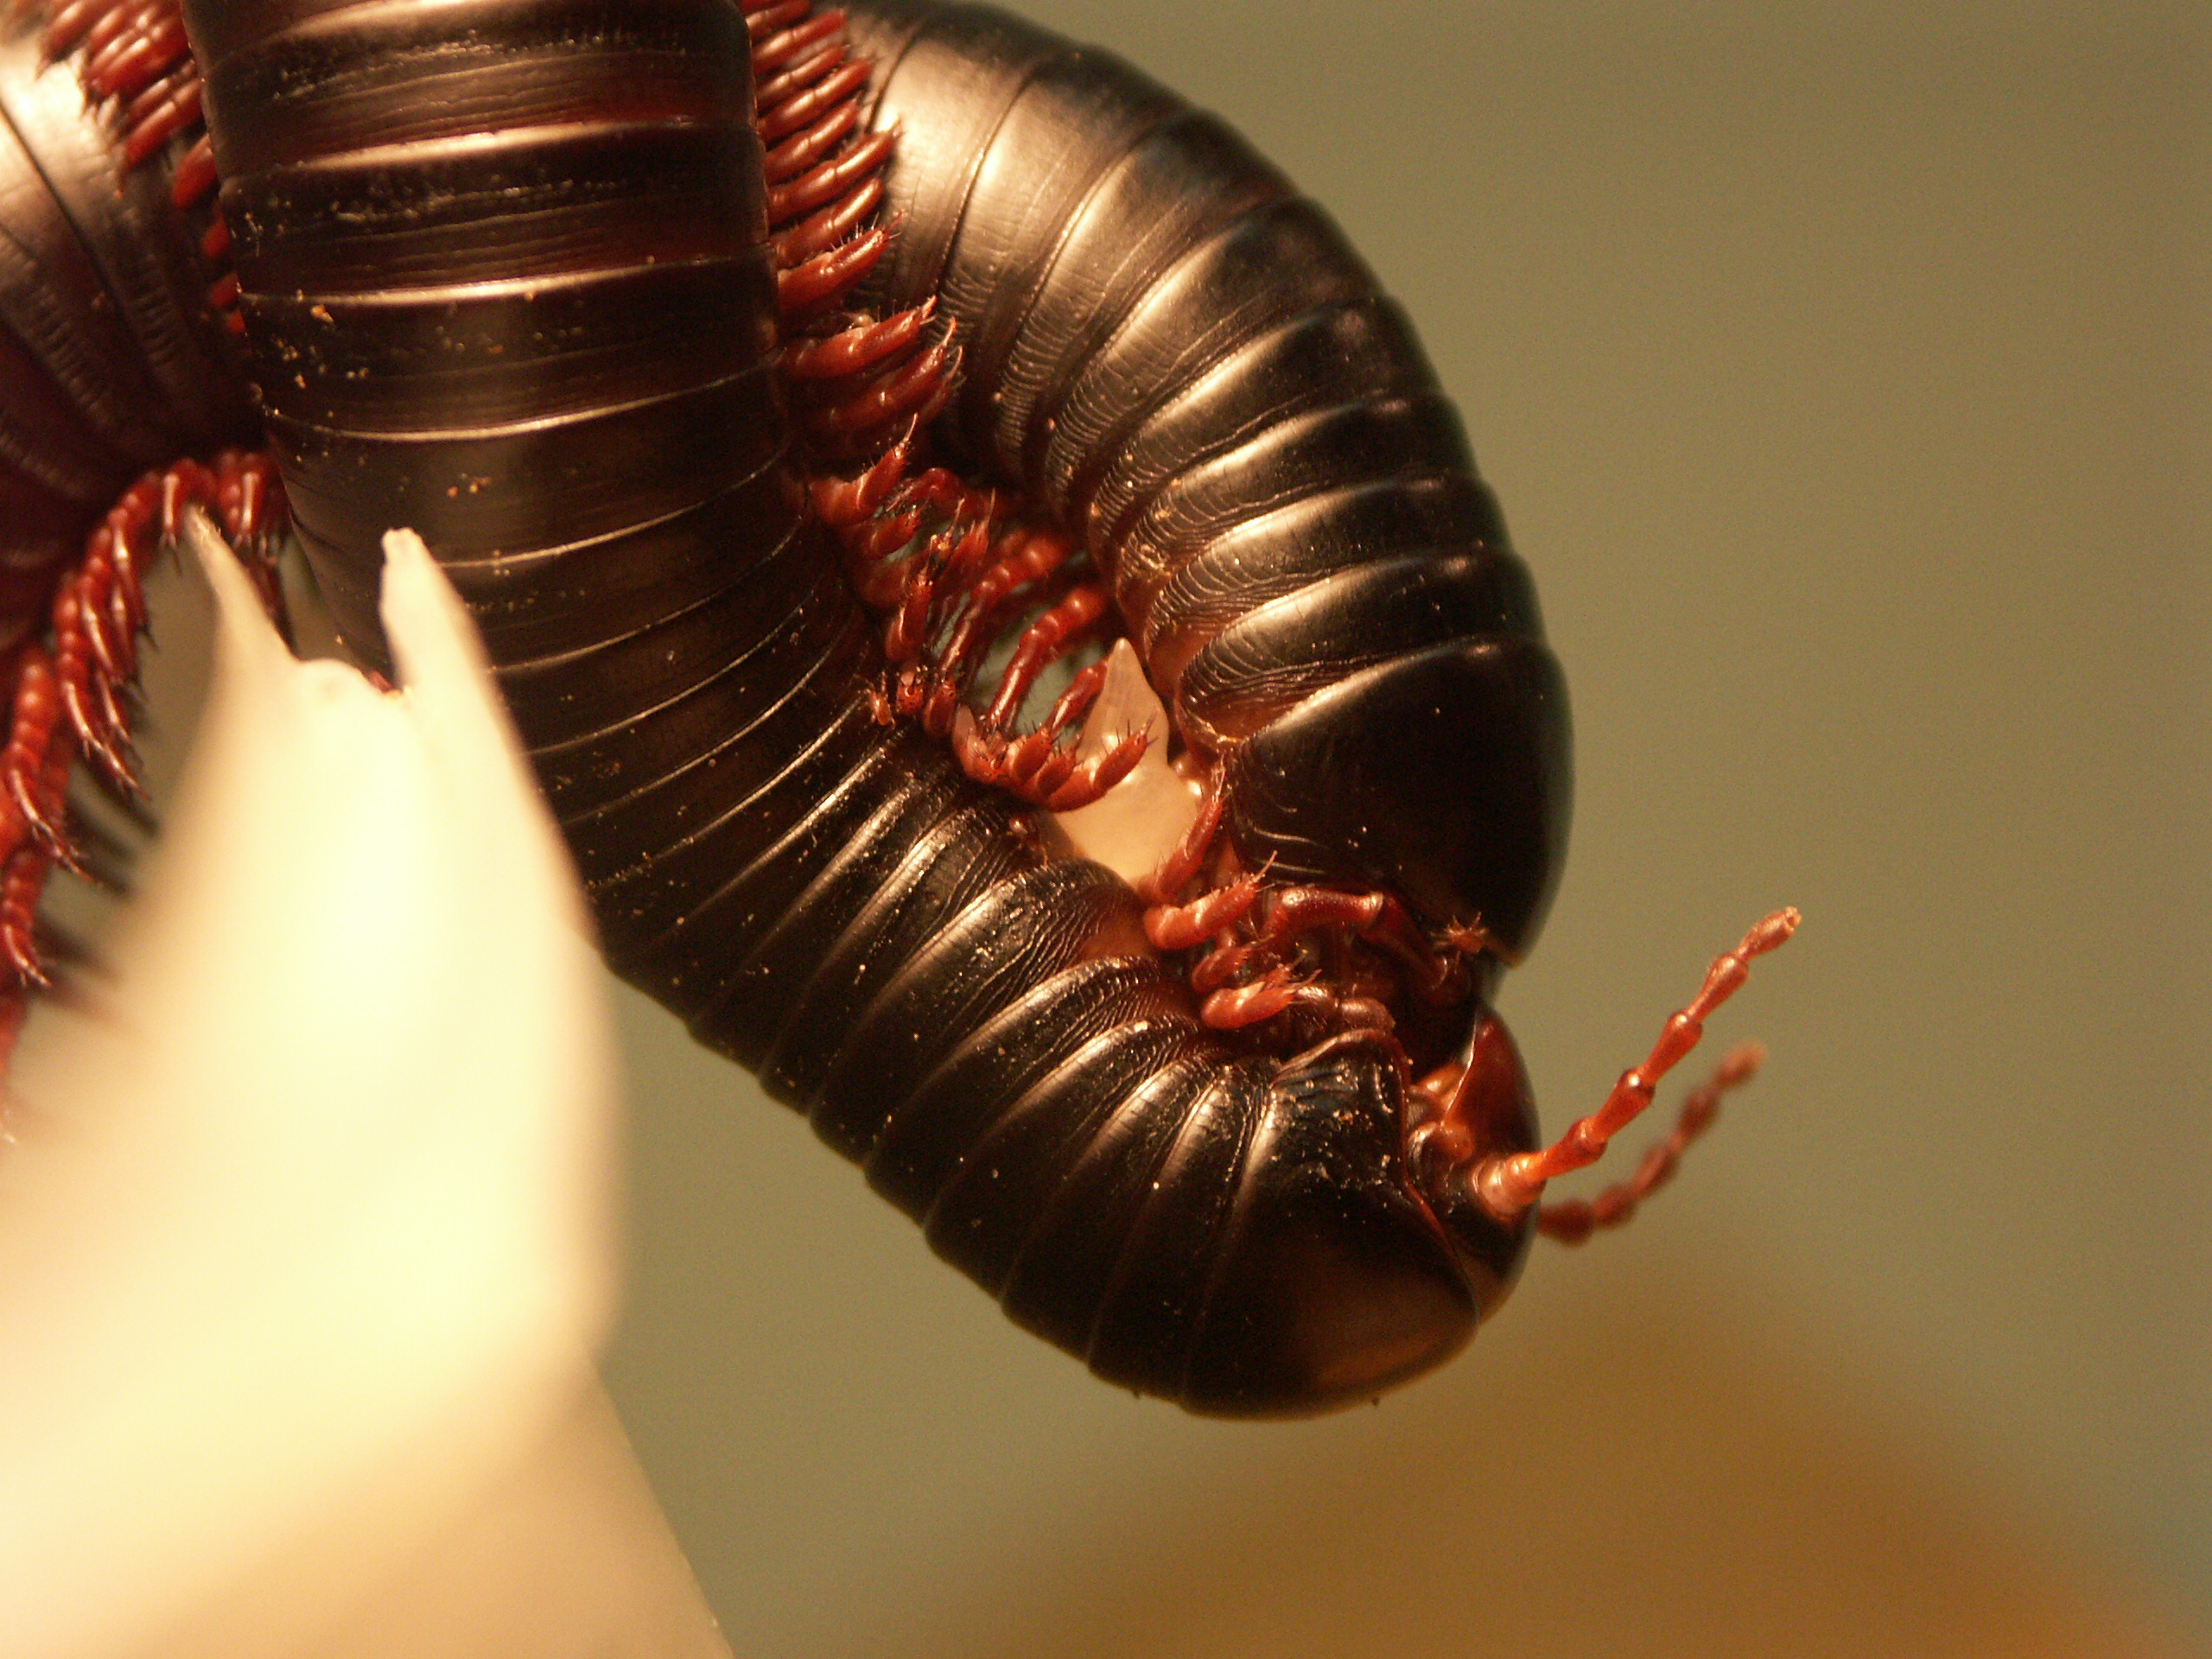 Two giant millipedes preparing to mate